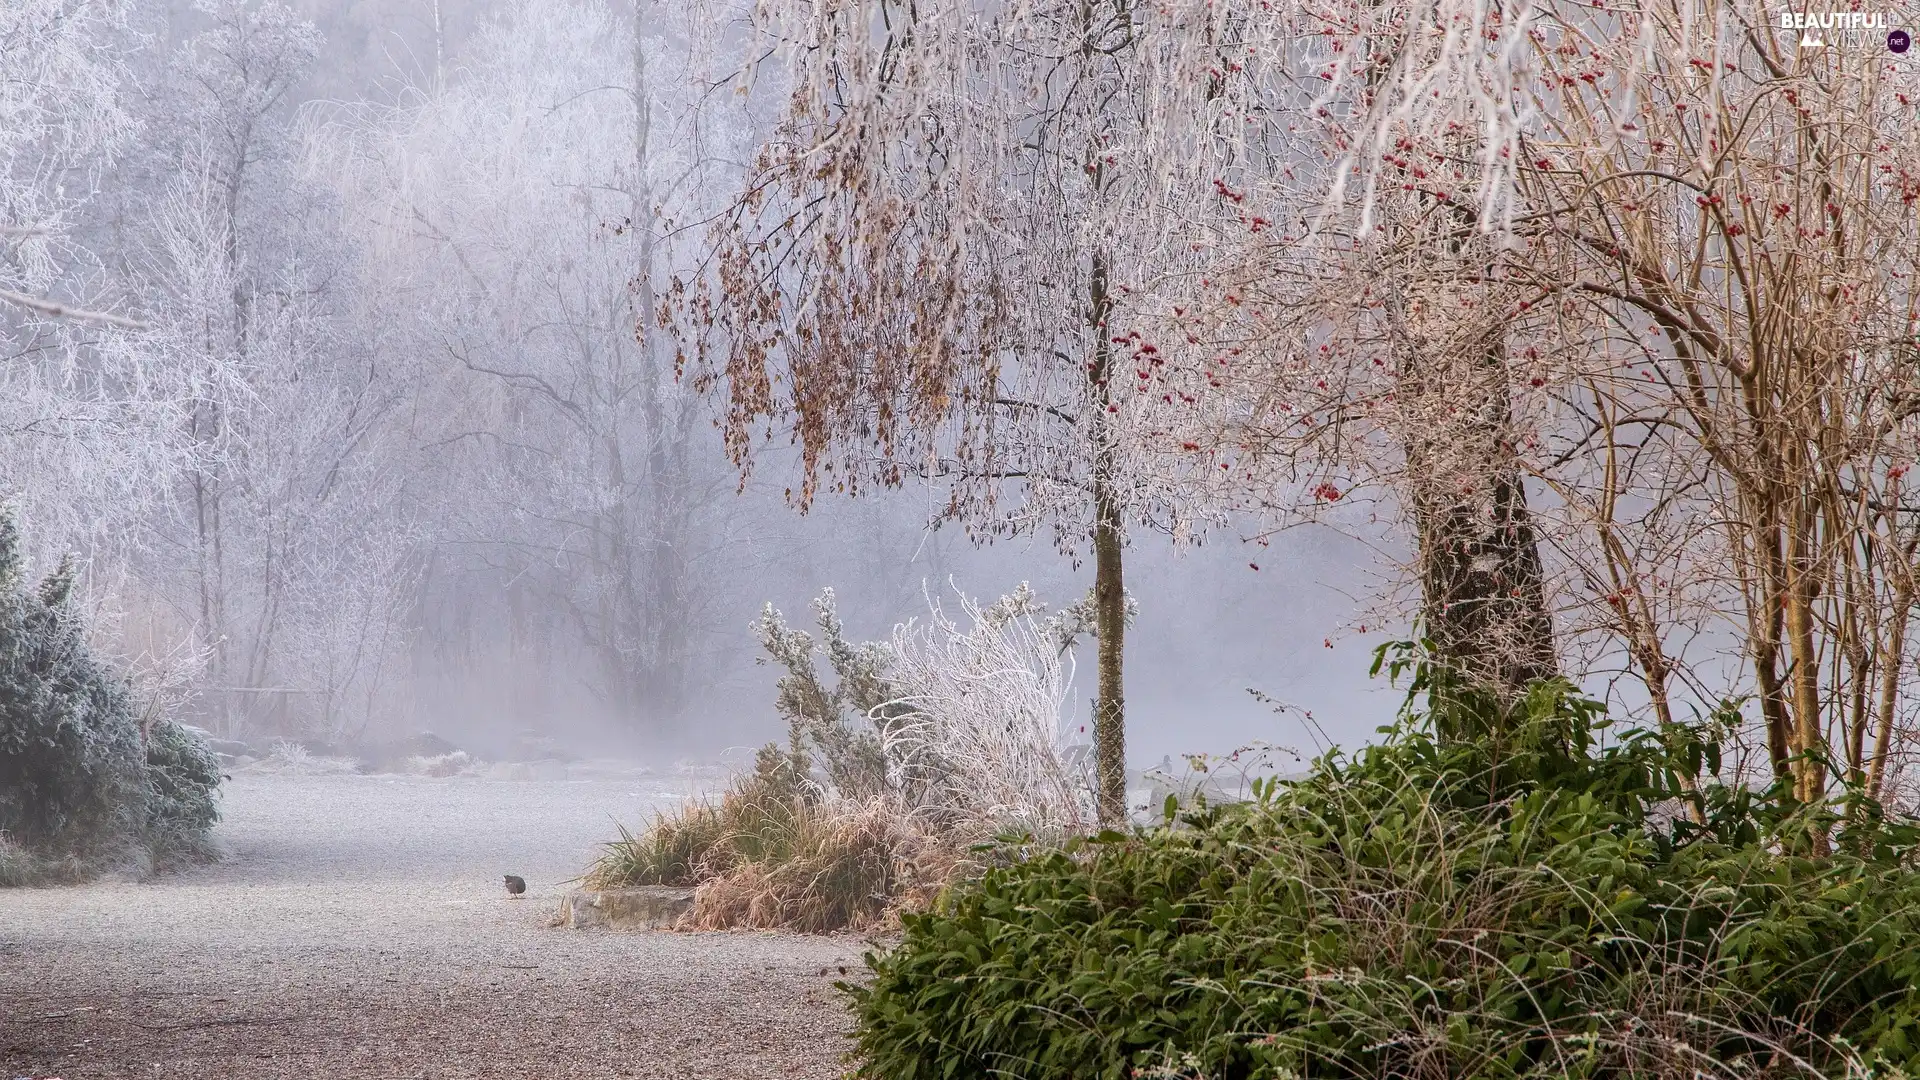 frosty, Fog, viewes, hoarfrost, Park, trees, grass